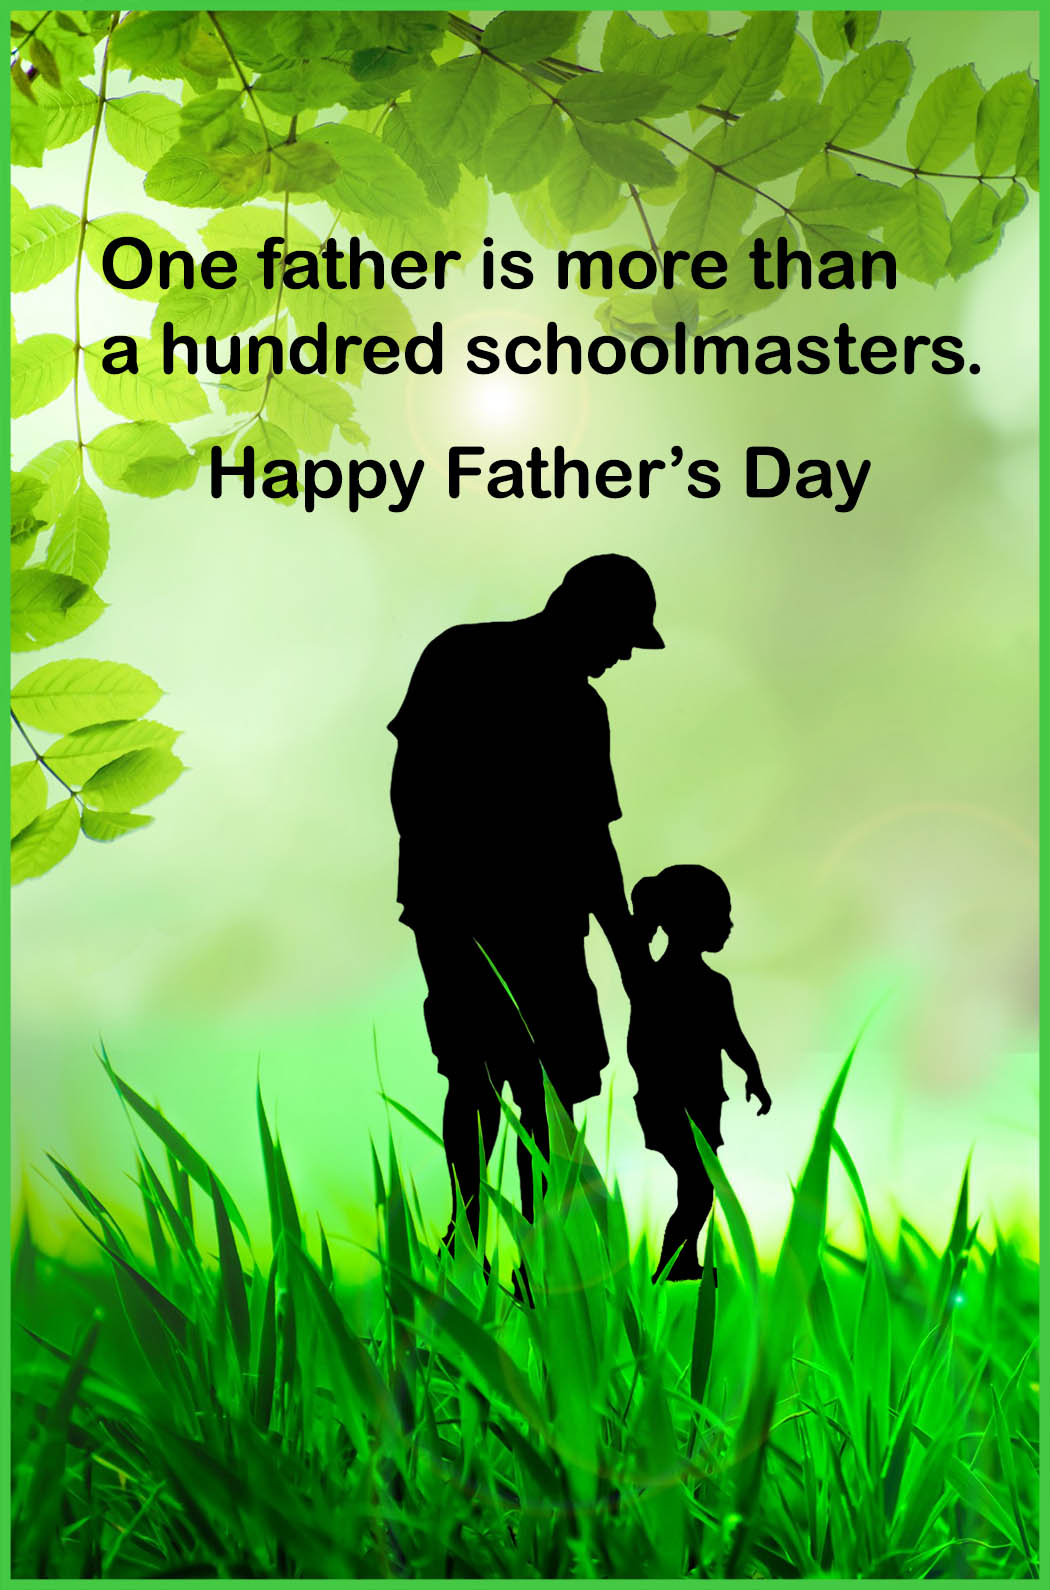 fathers-day-greeting-cards-free-printable-free-printable-templates